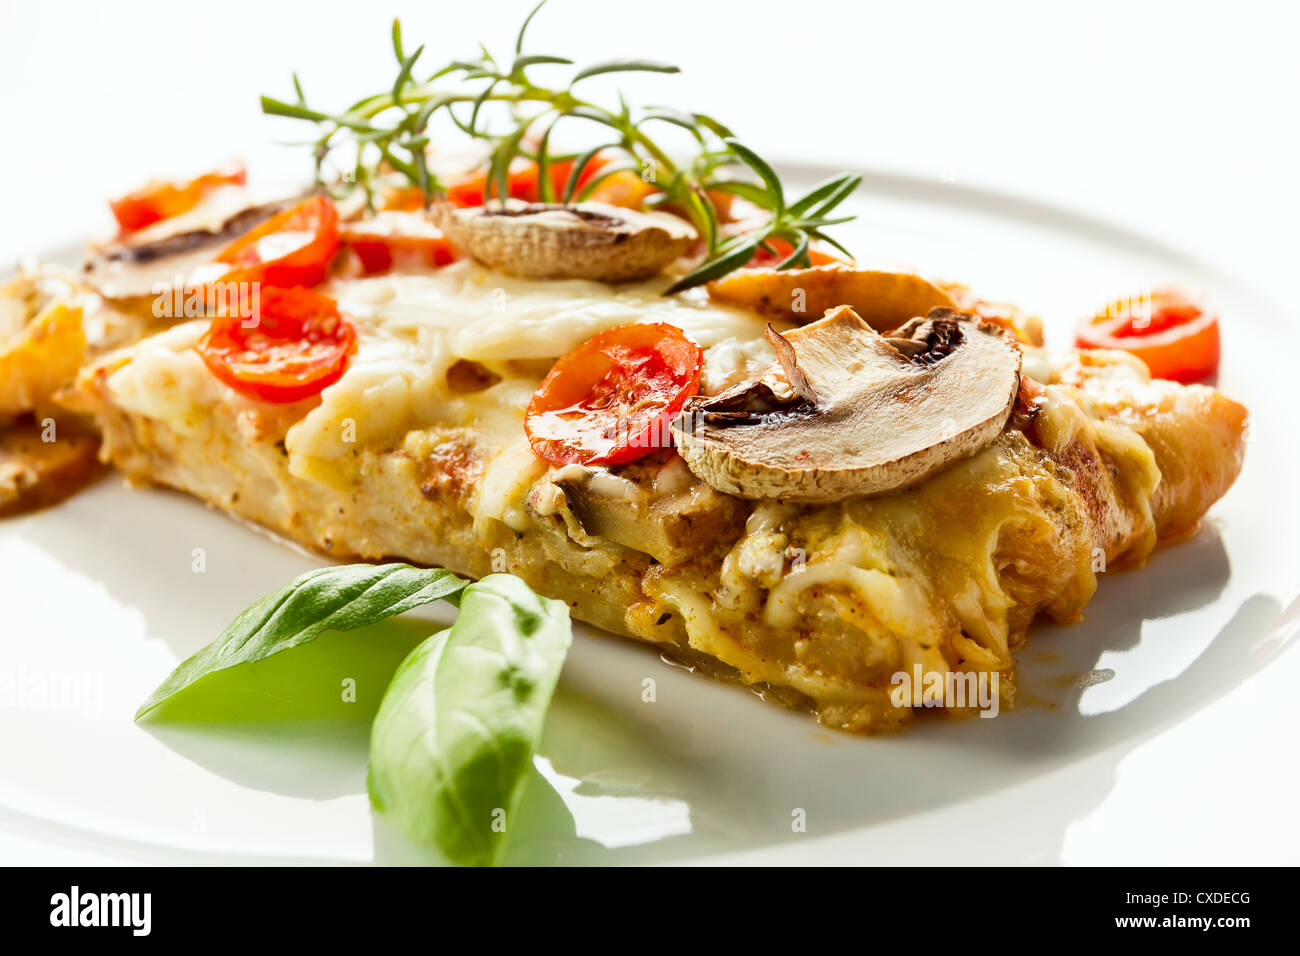 Tasty healthy fish fillet with vegetables and mushrooms Stock Photo